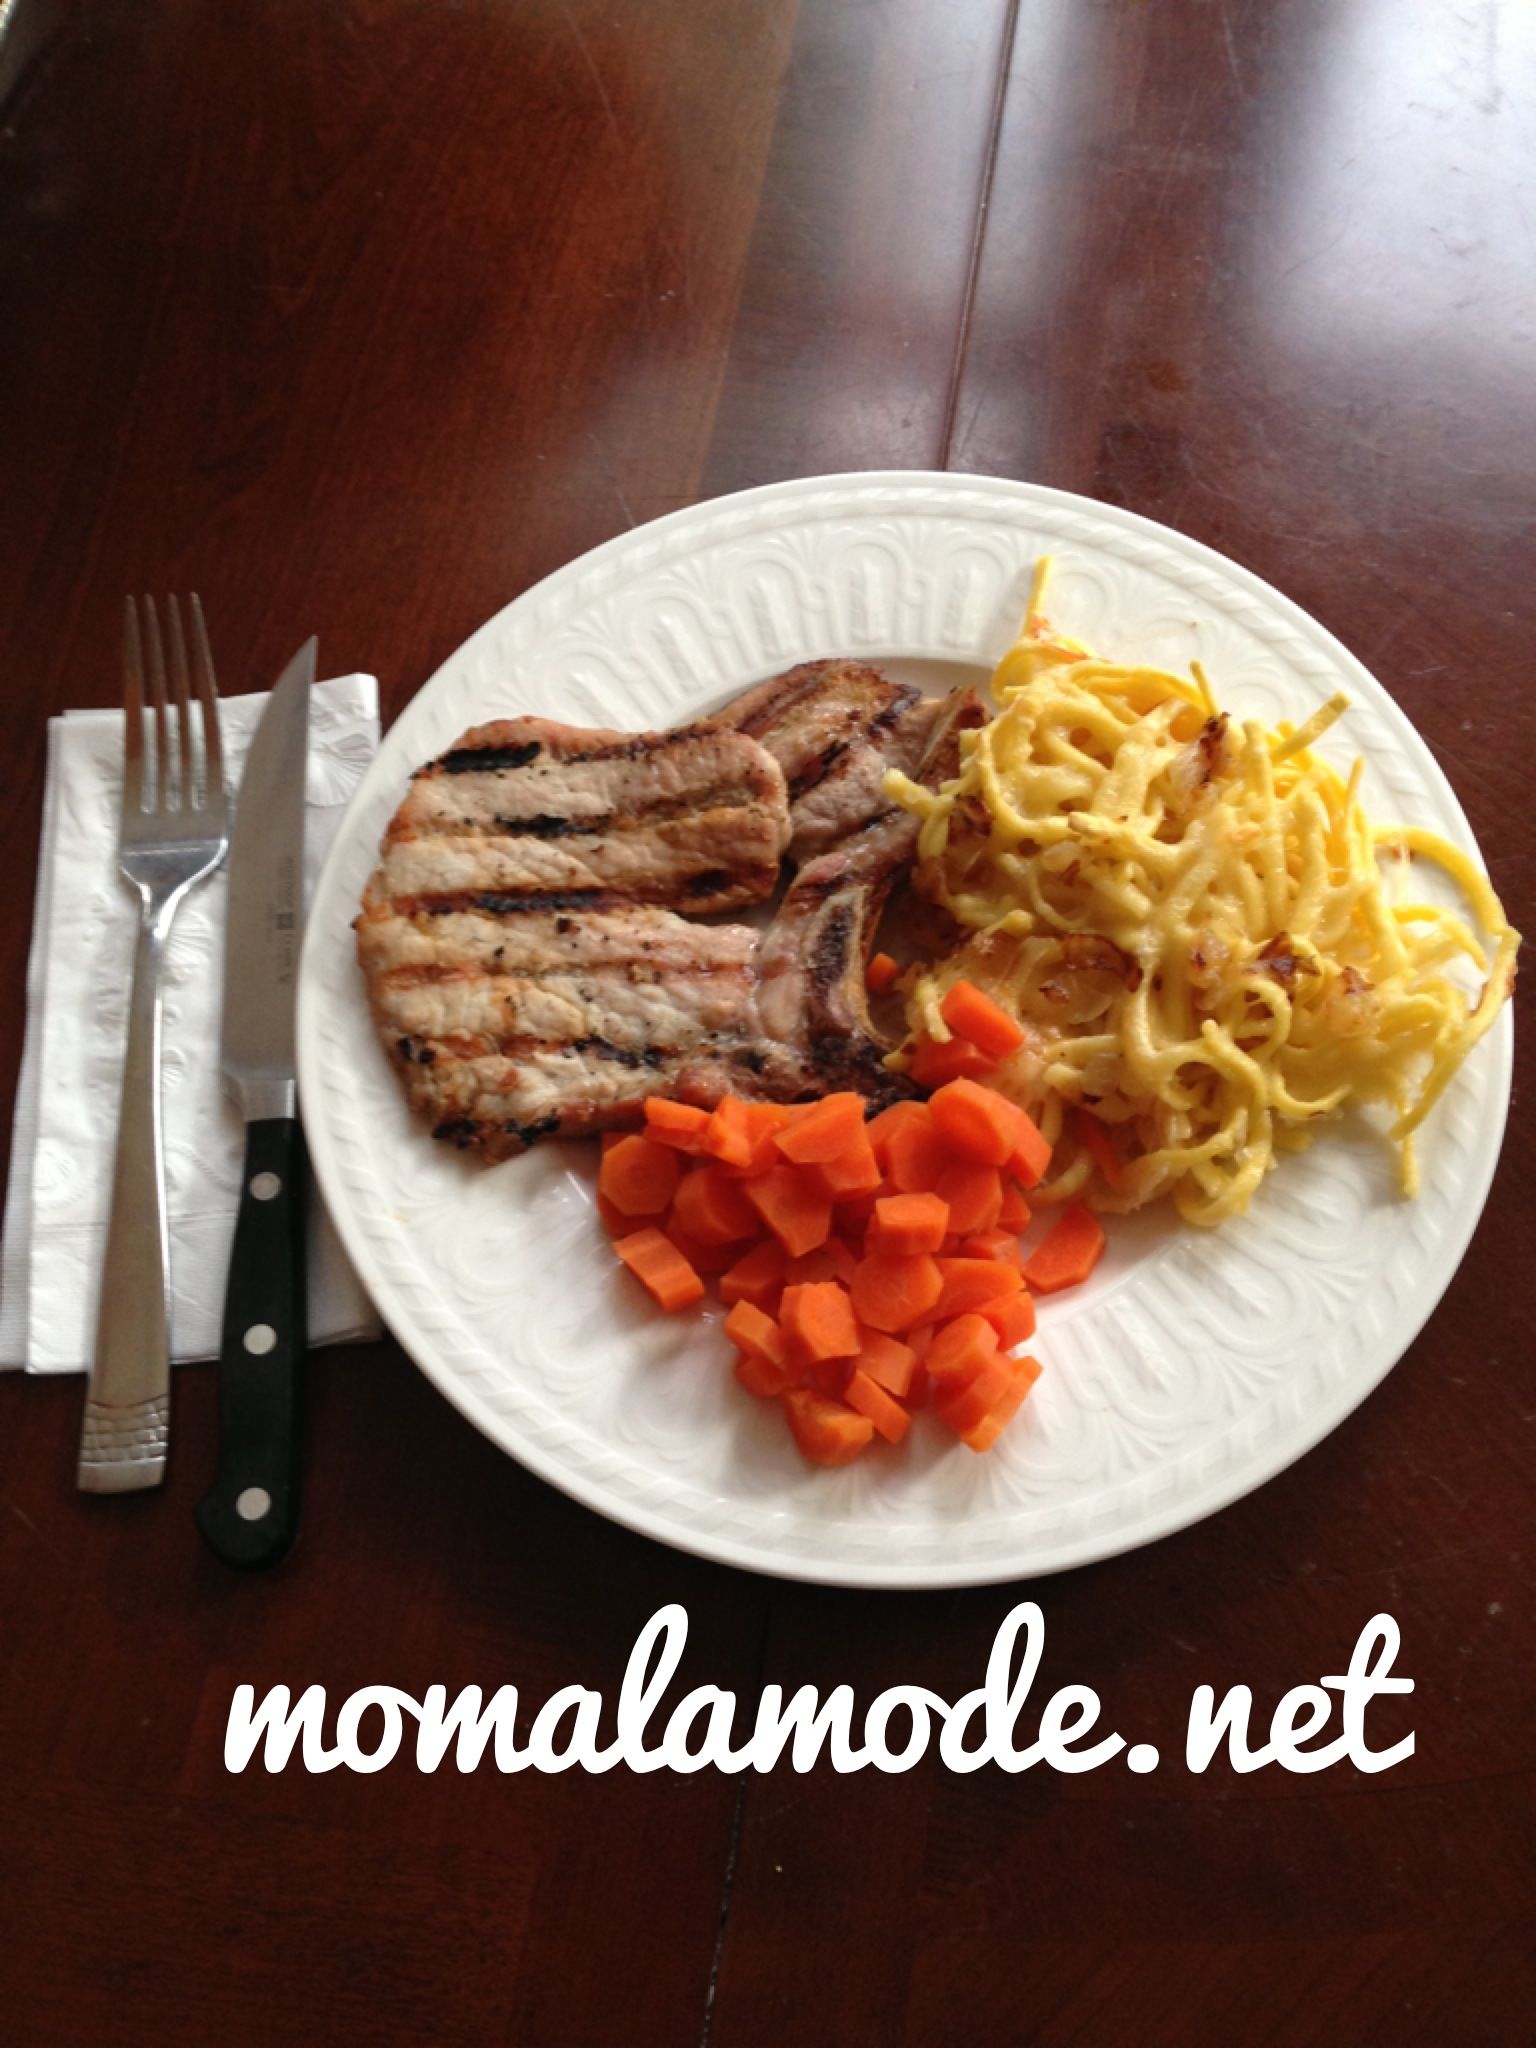 Grilled Pork Chop with Spaetzle and Carrots